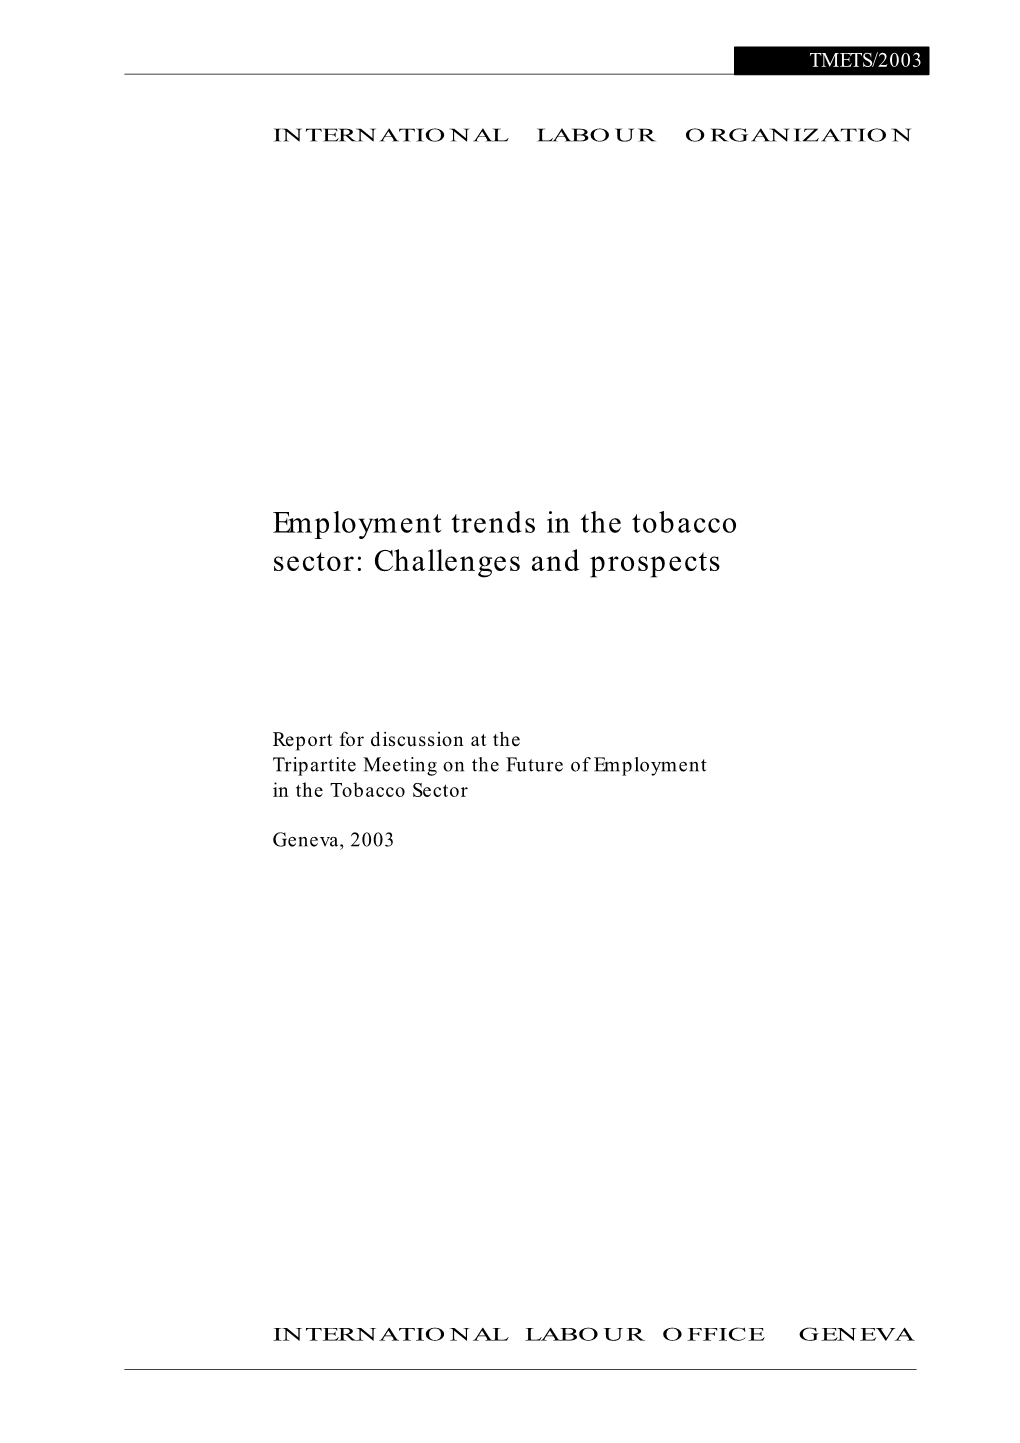 Employment Trends in the Tobacco Sector: Challenges and Prospects